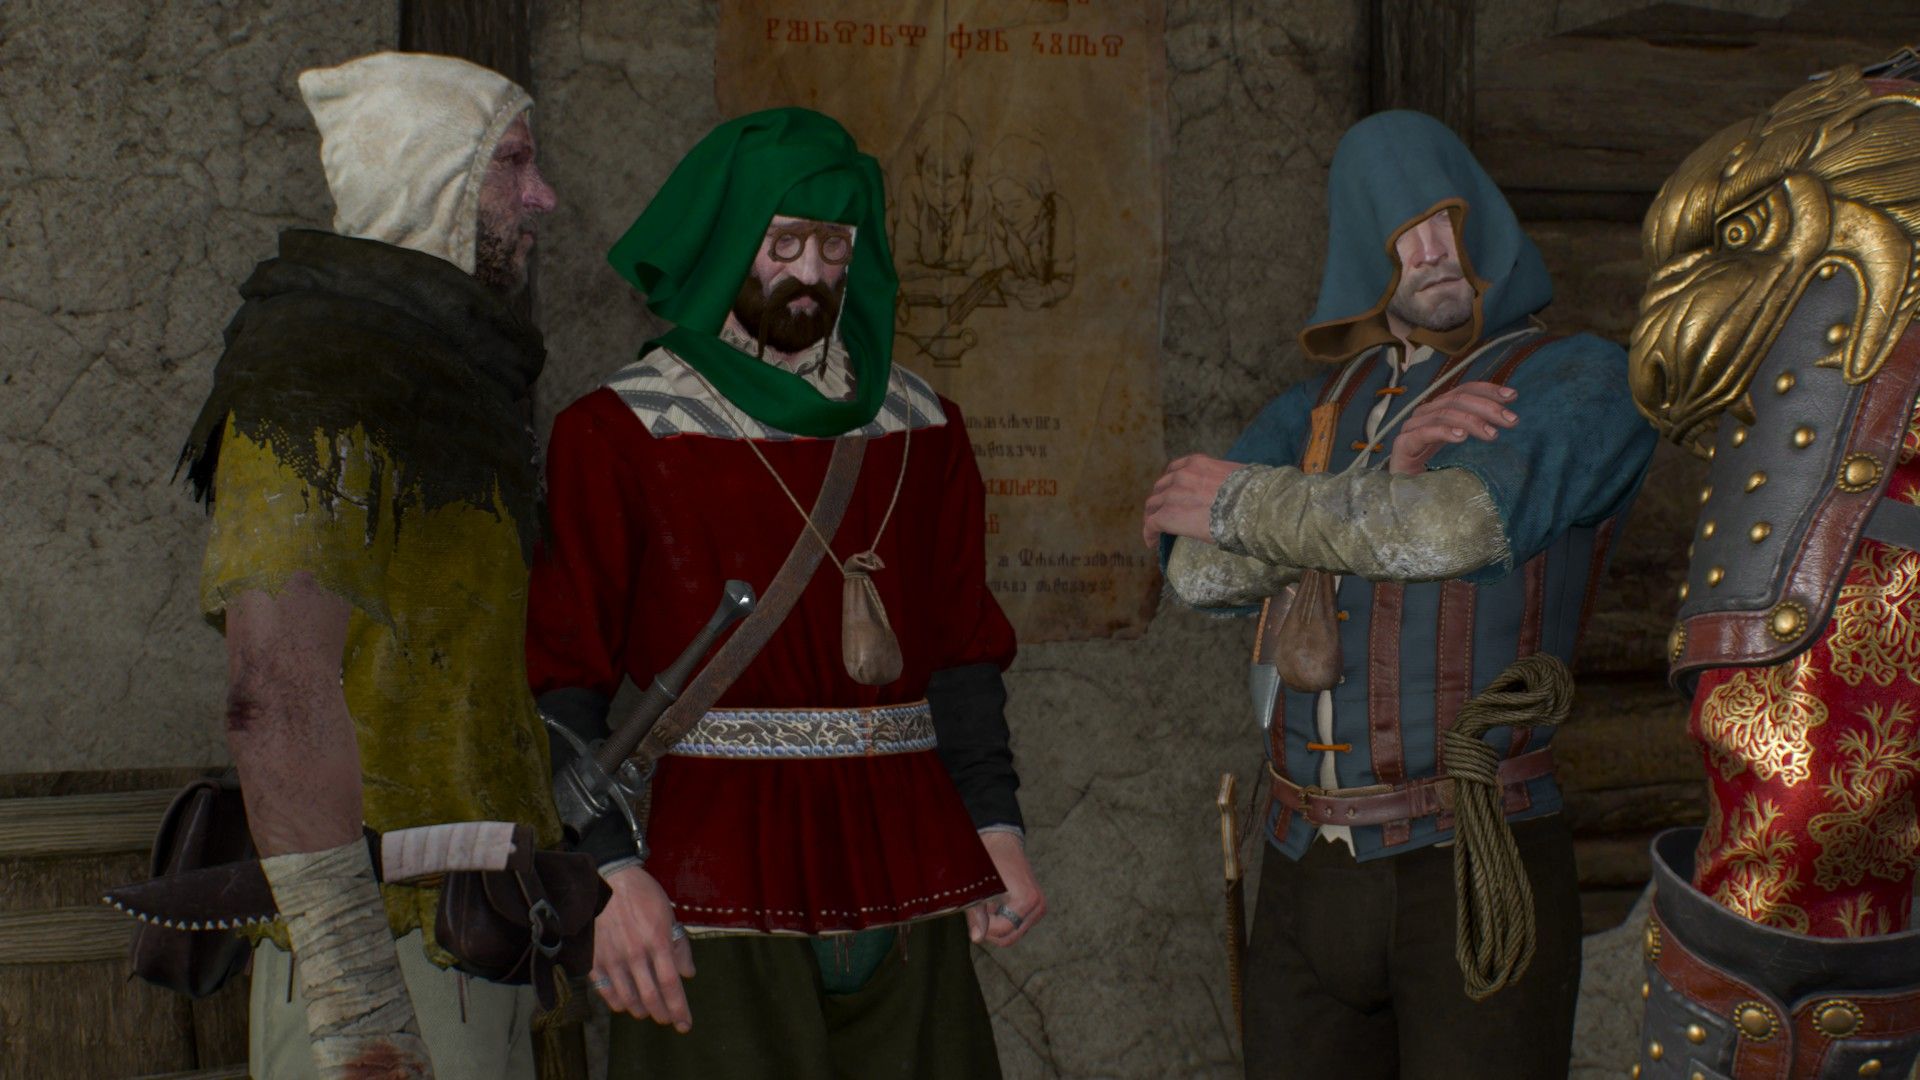 A pair of thugs wearing hoods and covered in filth glare at Geralt while a merchant wearing a green headdress hangs his head in defeat.